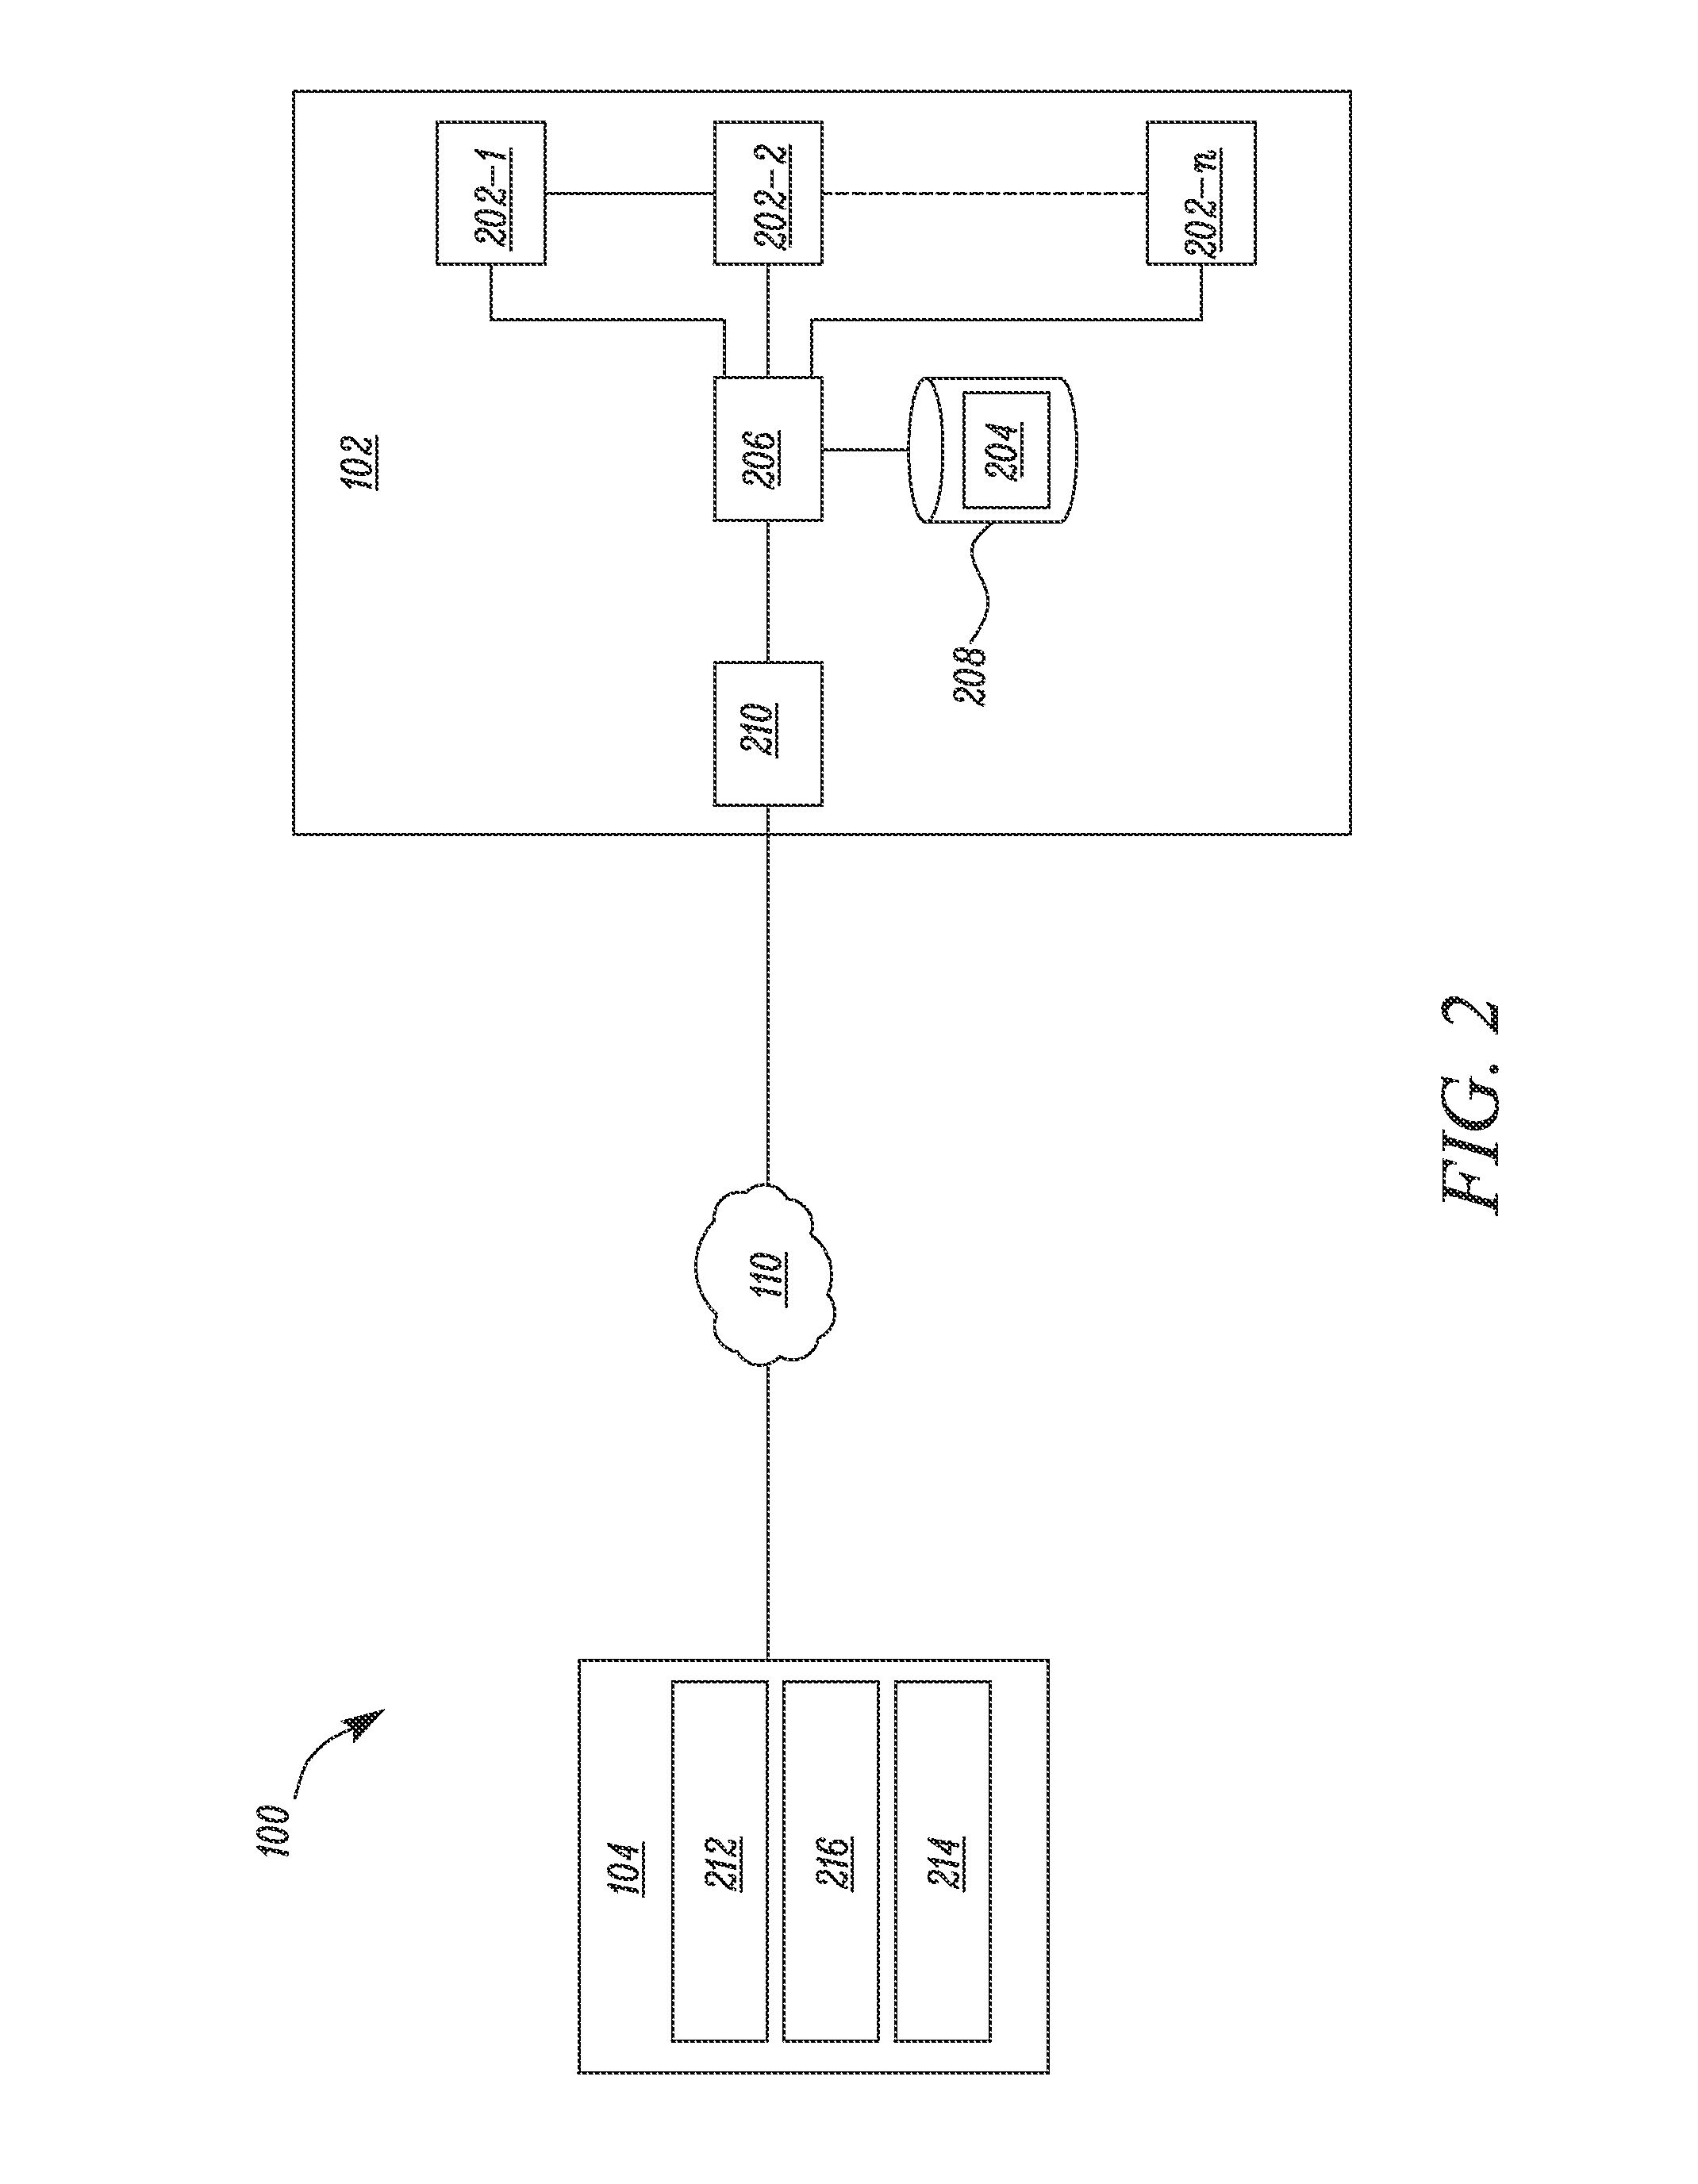 System and method for remotely monitoring machines